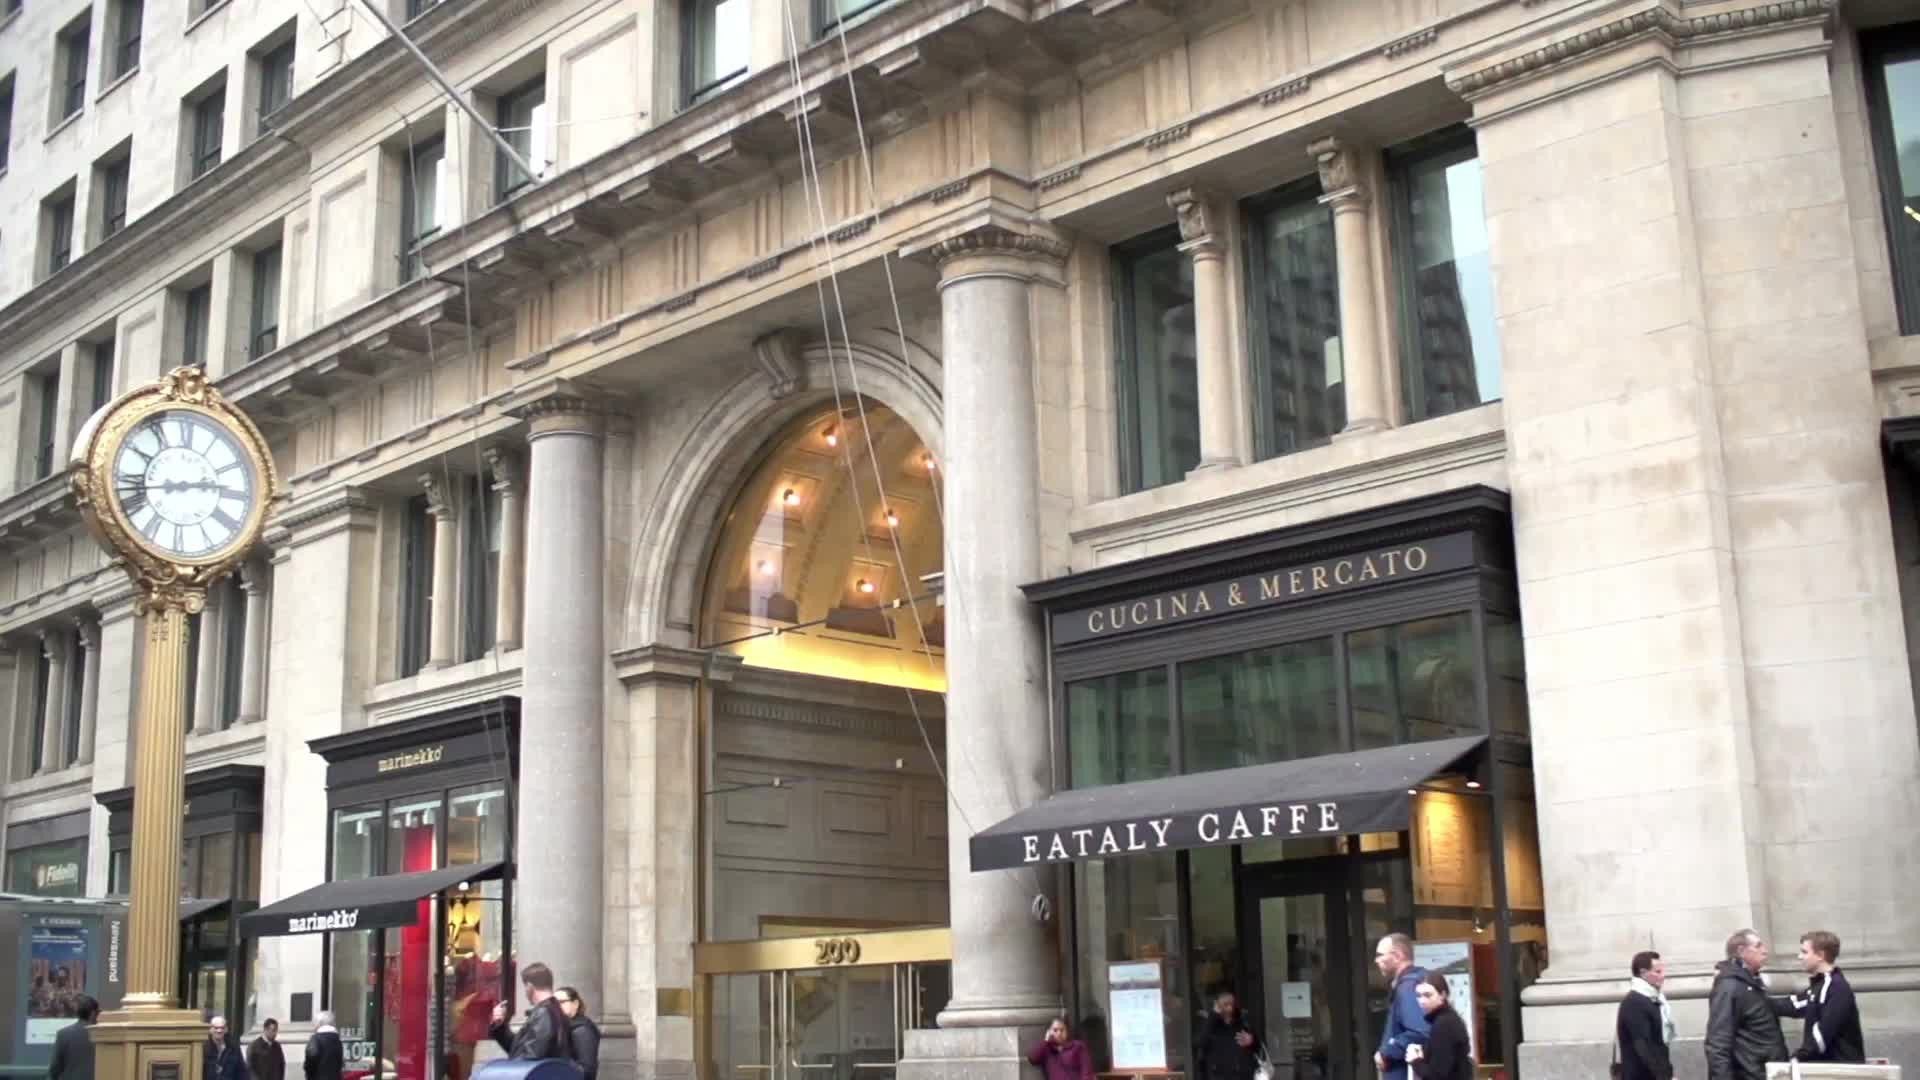 Eataly Caffe and famous 5th Ave clock in slow motion from moving vehicle in Manhattan NYC